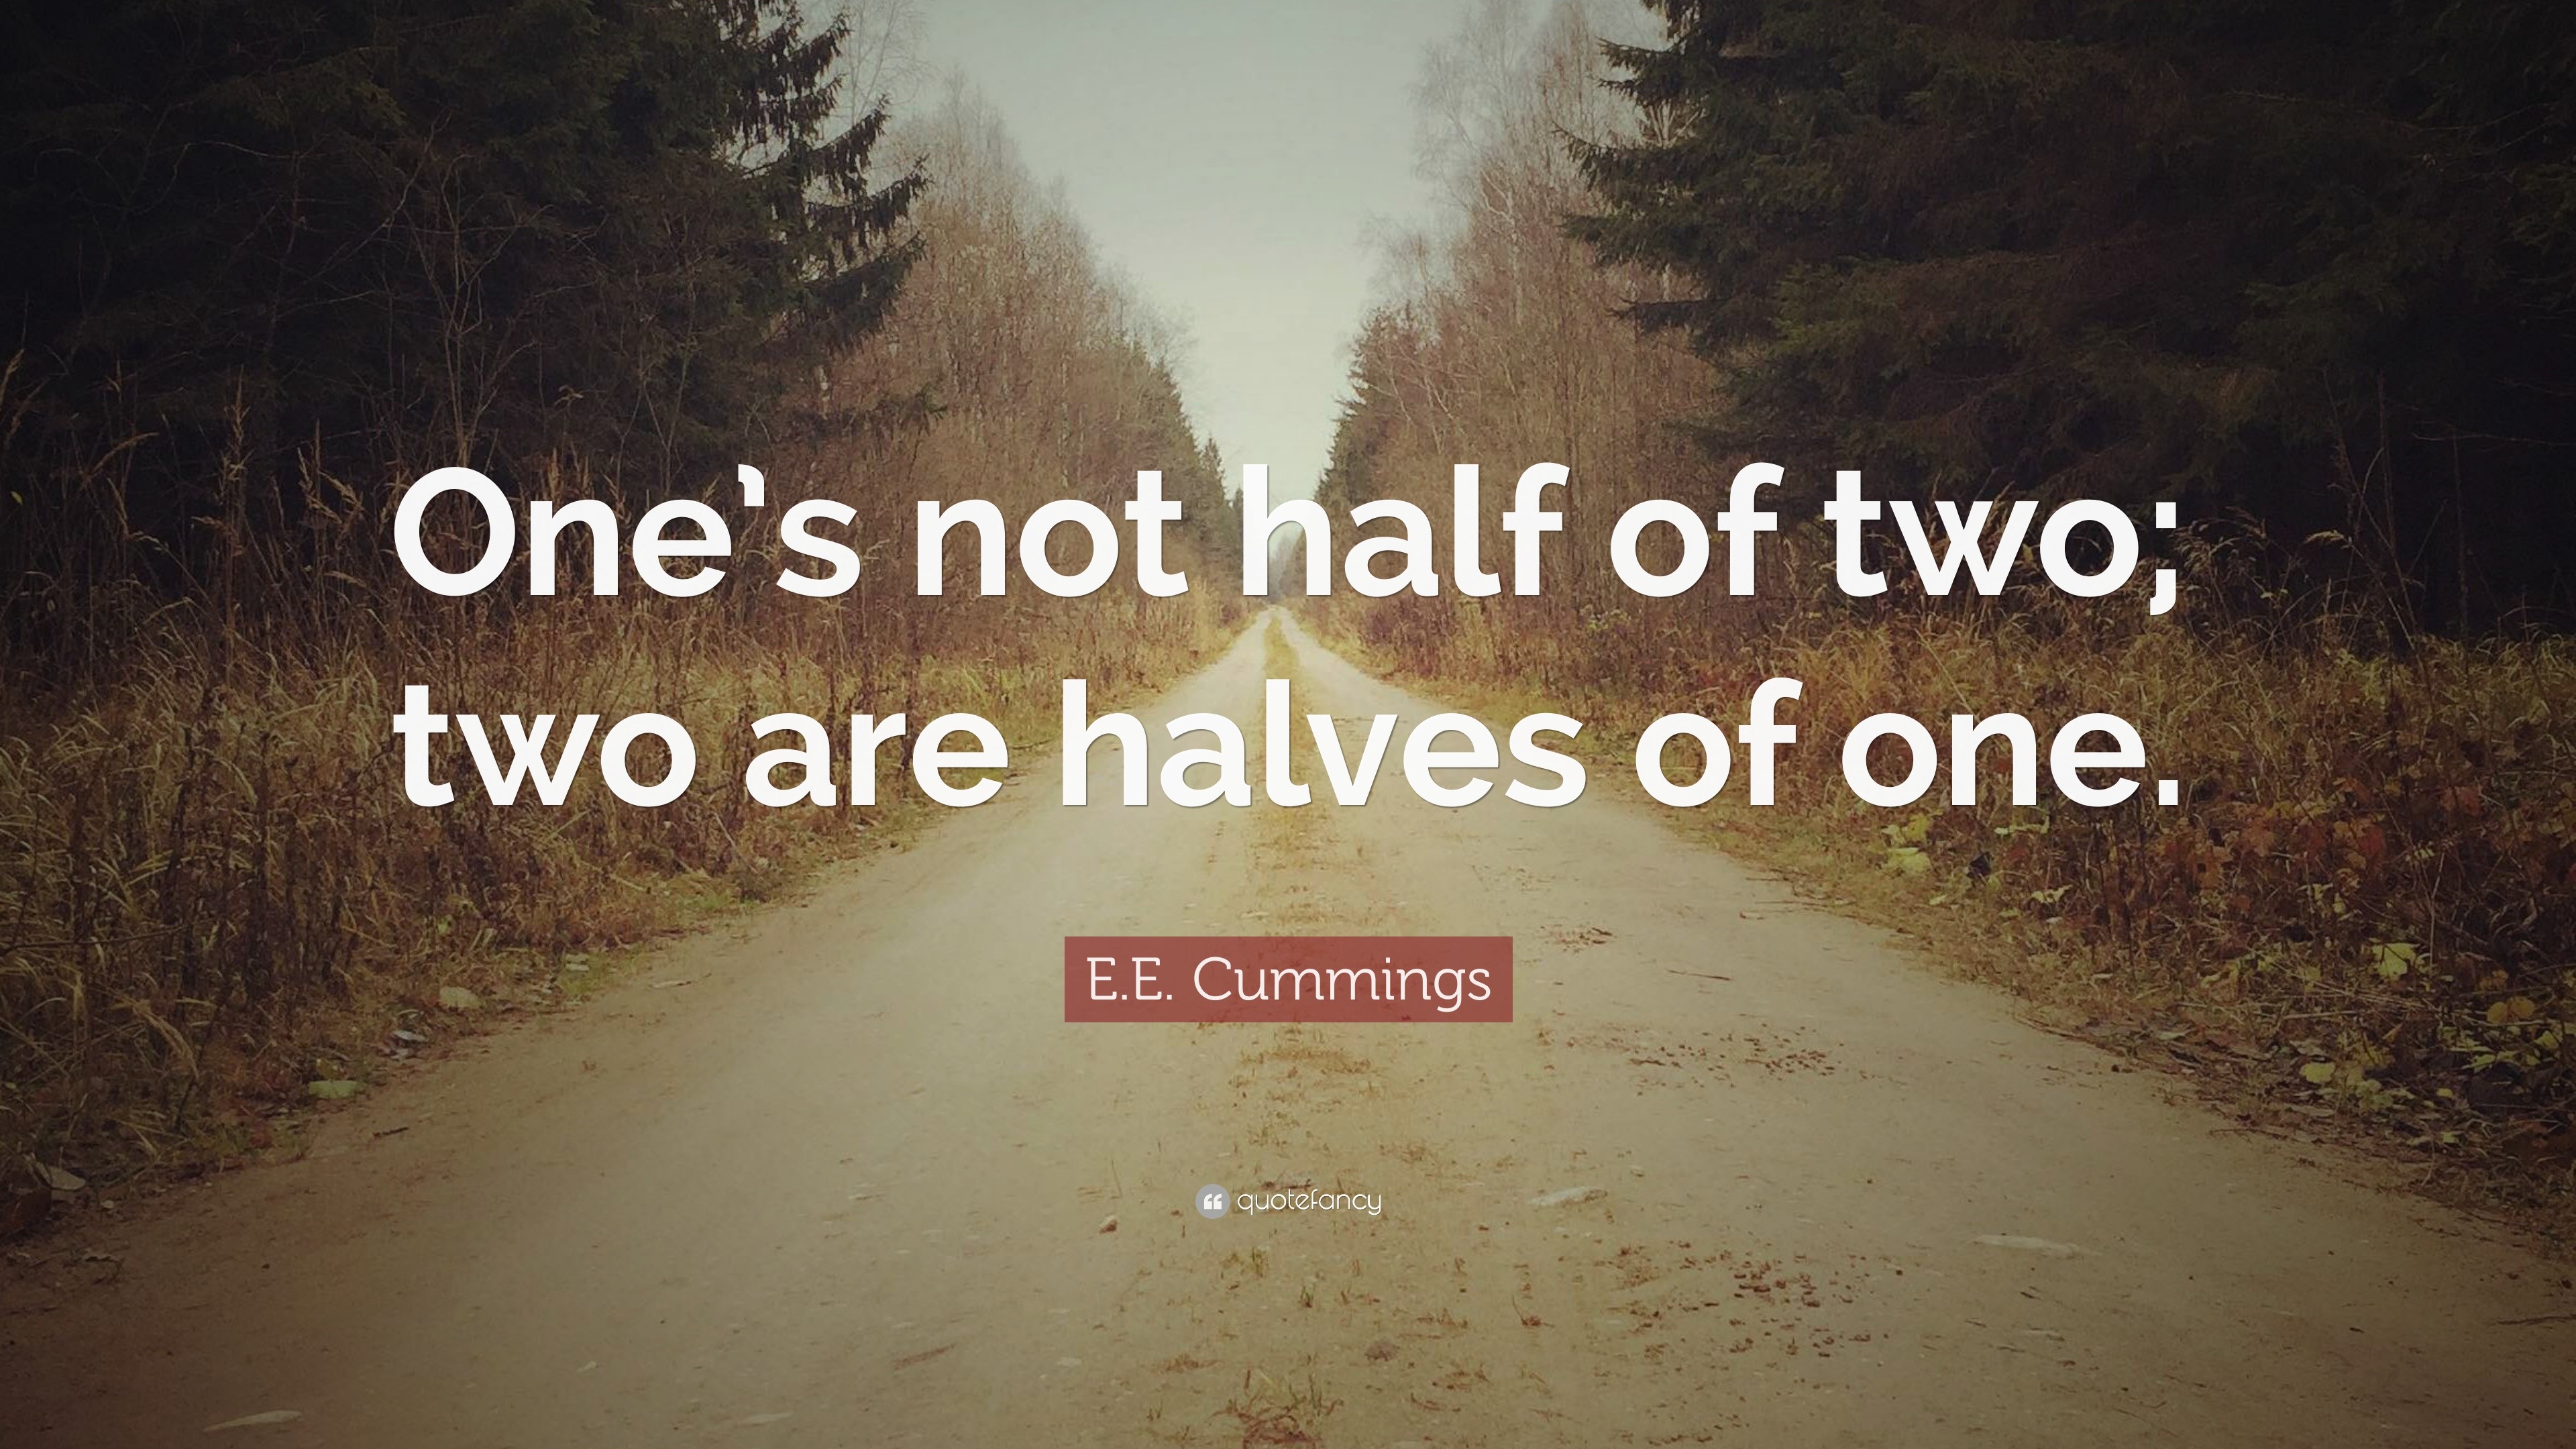 E.E. Cummings Quote: “One’s not half of two; two are halves of one.” (12 ...3840 x 2160